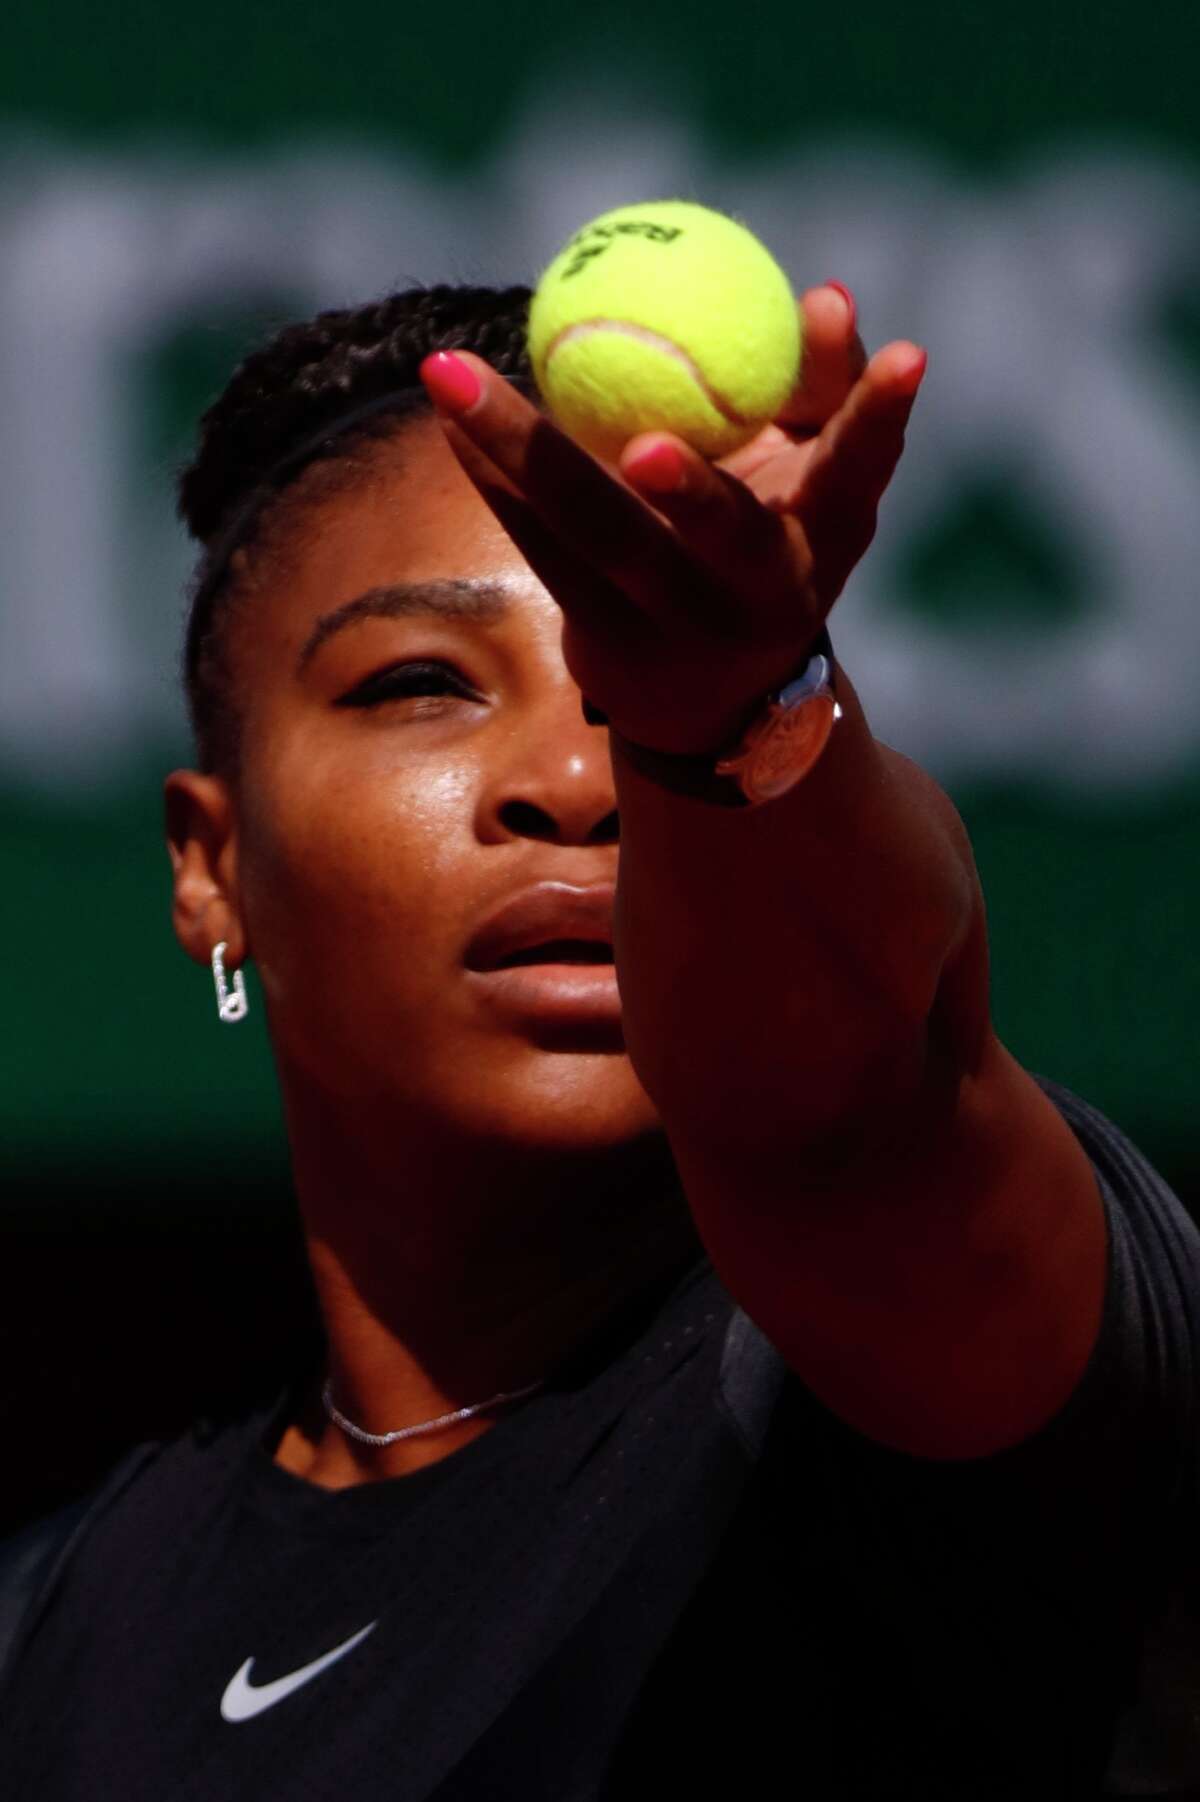 Serena Williams attends for her ladies singles match against Kristyna Pliskova of Czech Republic during day three of the 2018 French Open at Roland Garros on May 29, 2018 in Paris, France.